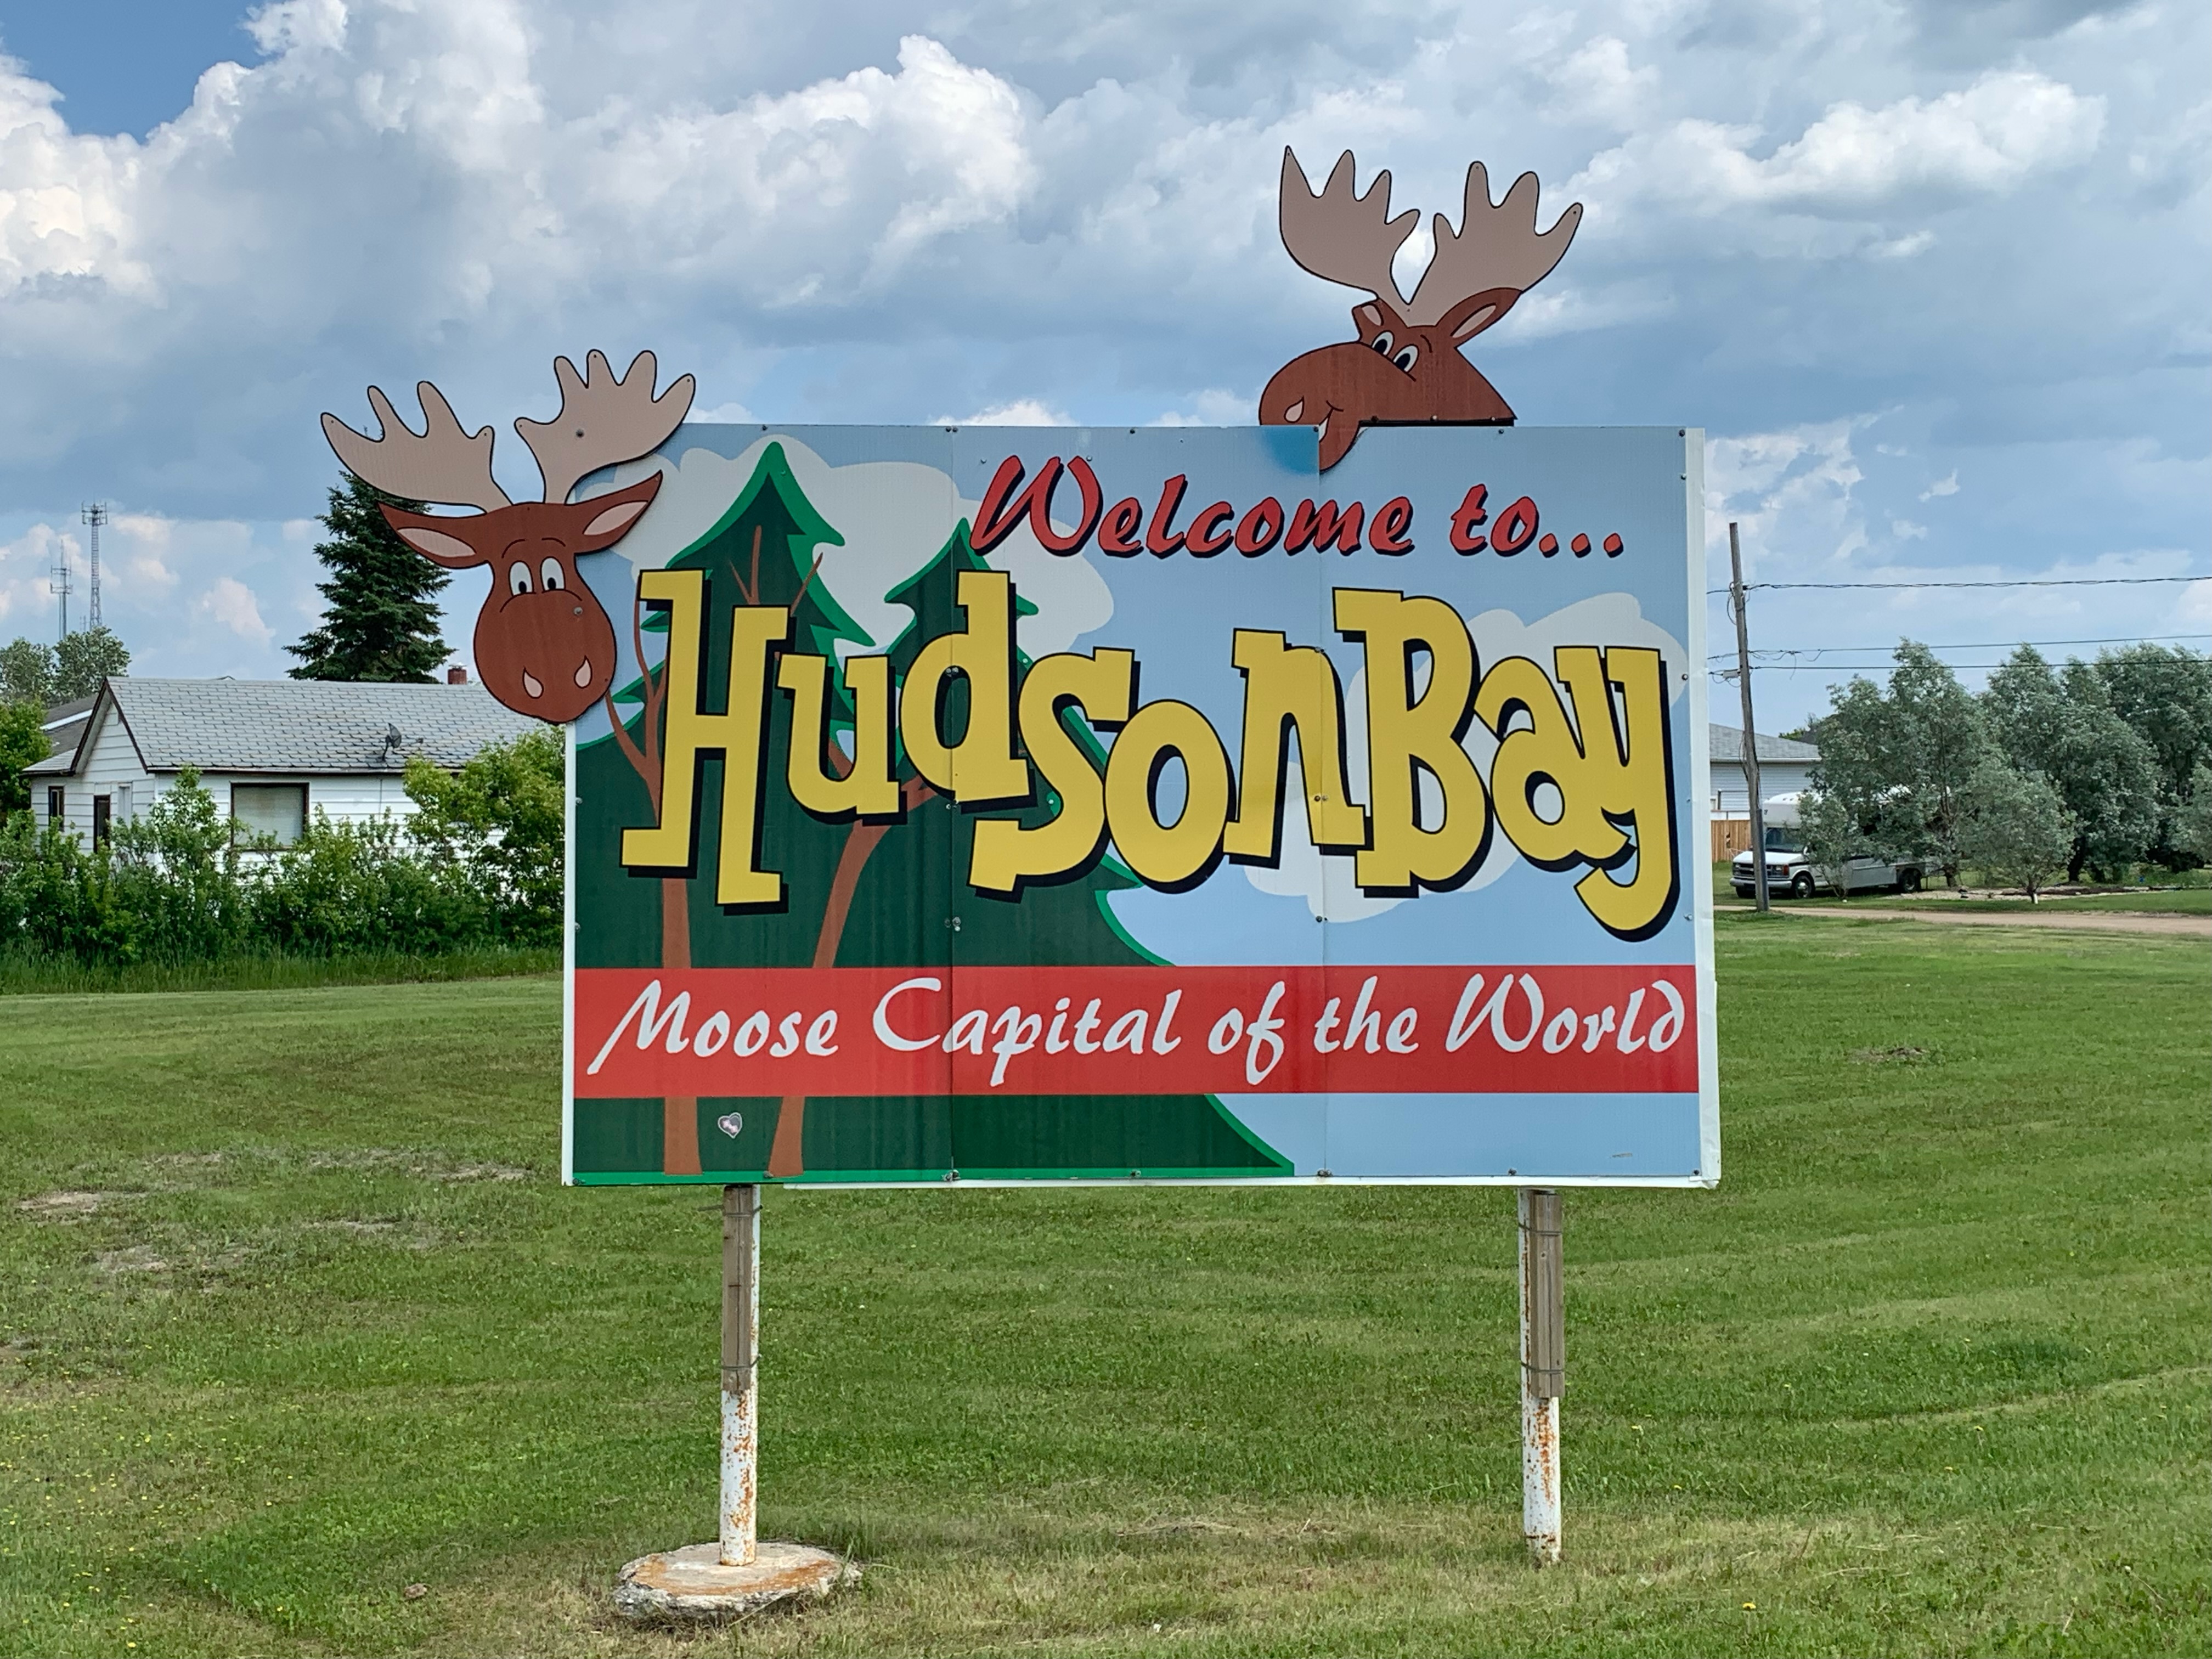 The search for the origins of hockey's Hudson Bay Rules continues